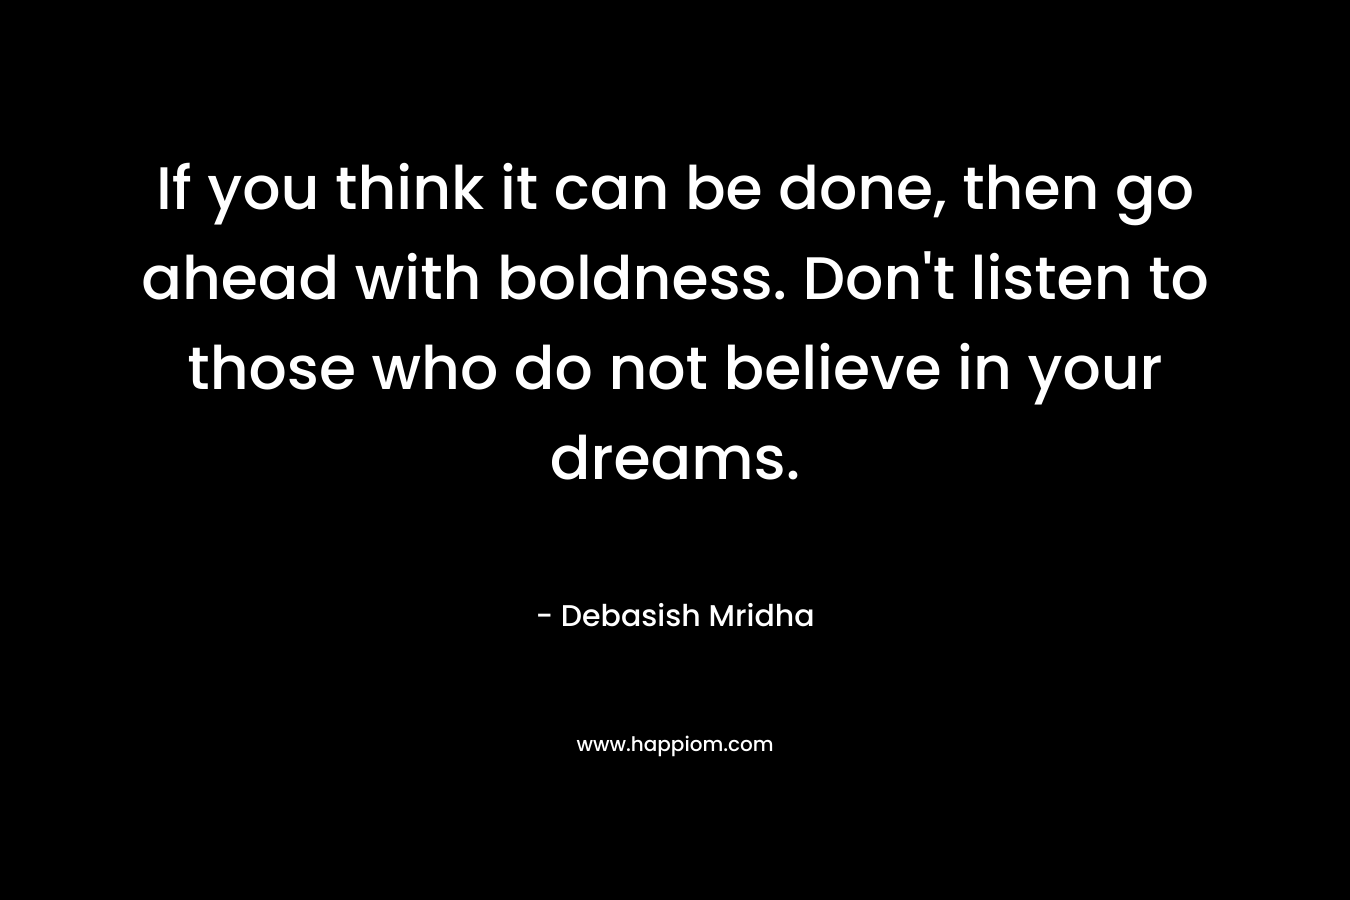 If you think it can be done, then go ahead with boldness. Don't listen to those who do not believe in your dreams.